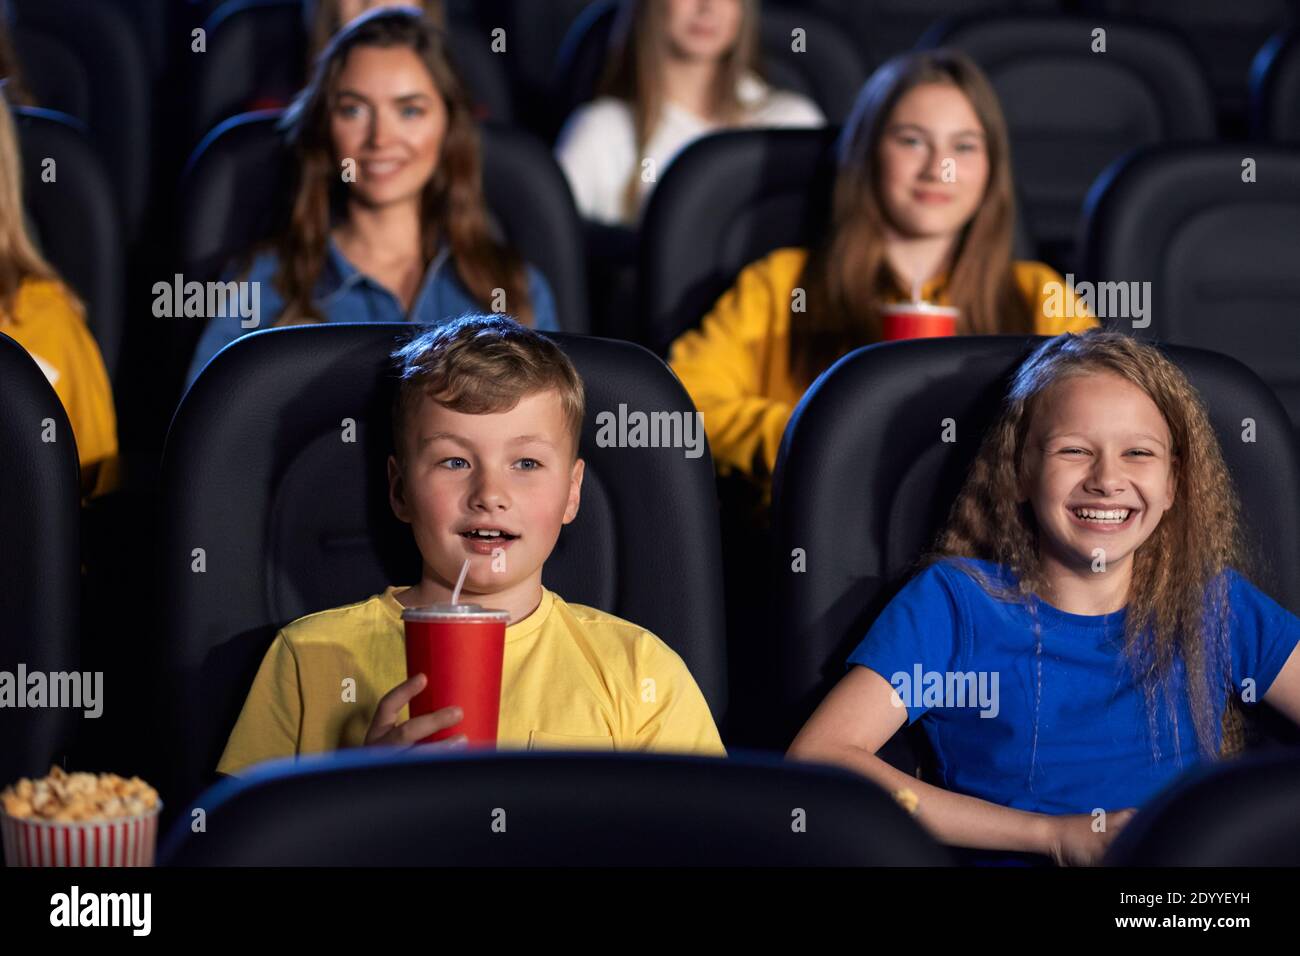 Front view of caucasian kids enjoying time together holding sparkling drink, young audience on background. Happy little friends sitting in cinema, watching funny cartoon. Entertainment concept. Stock Photo